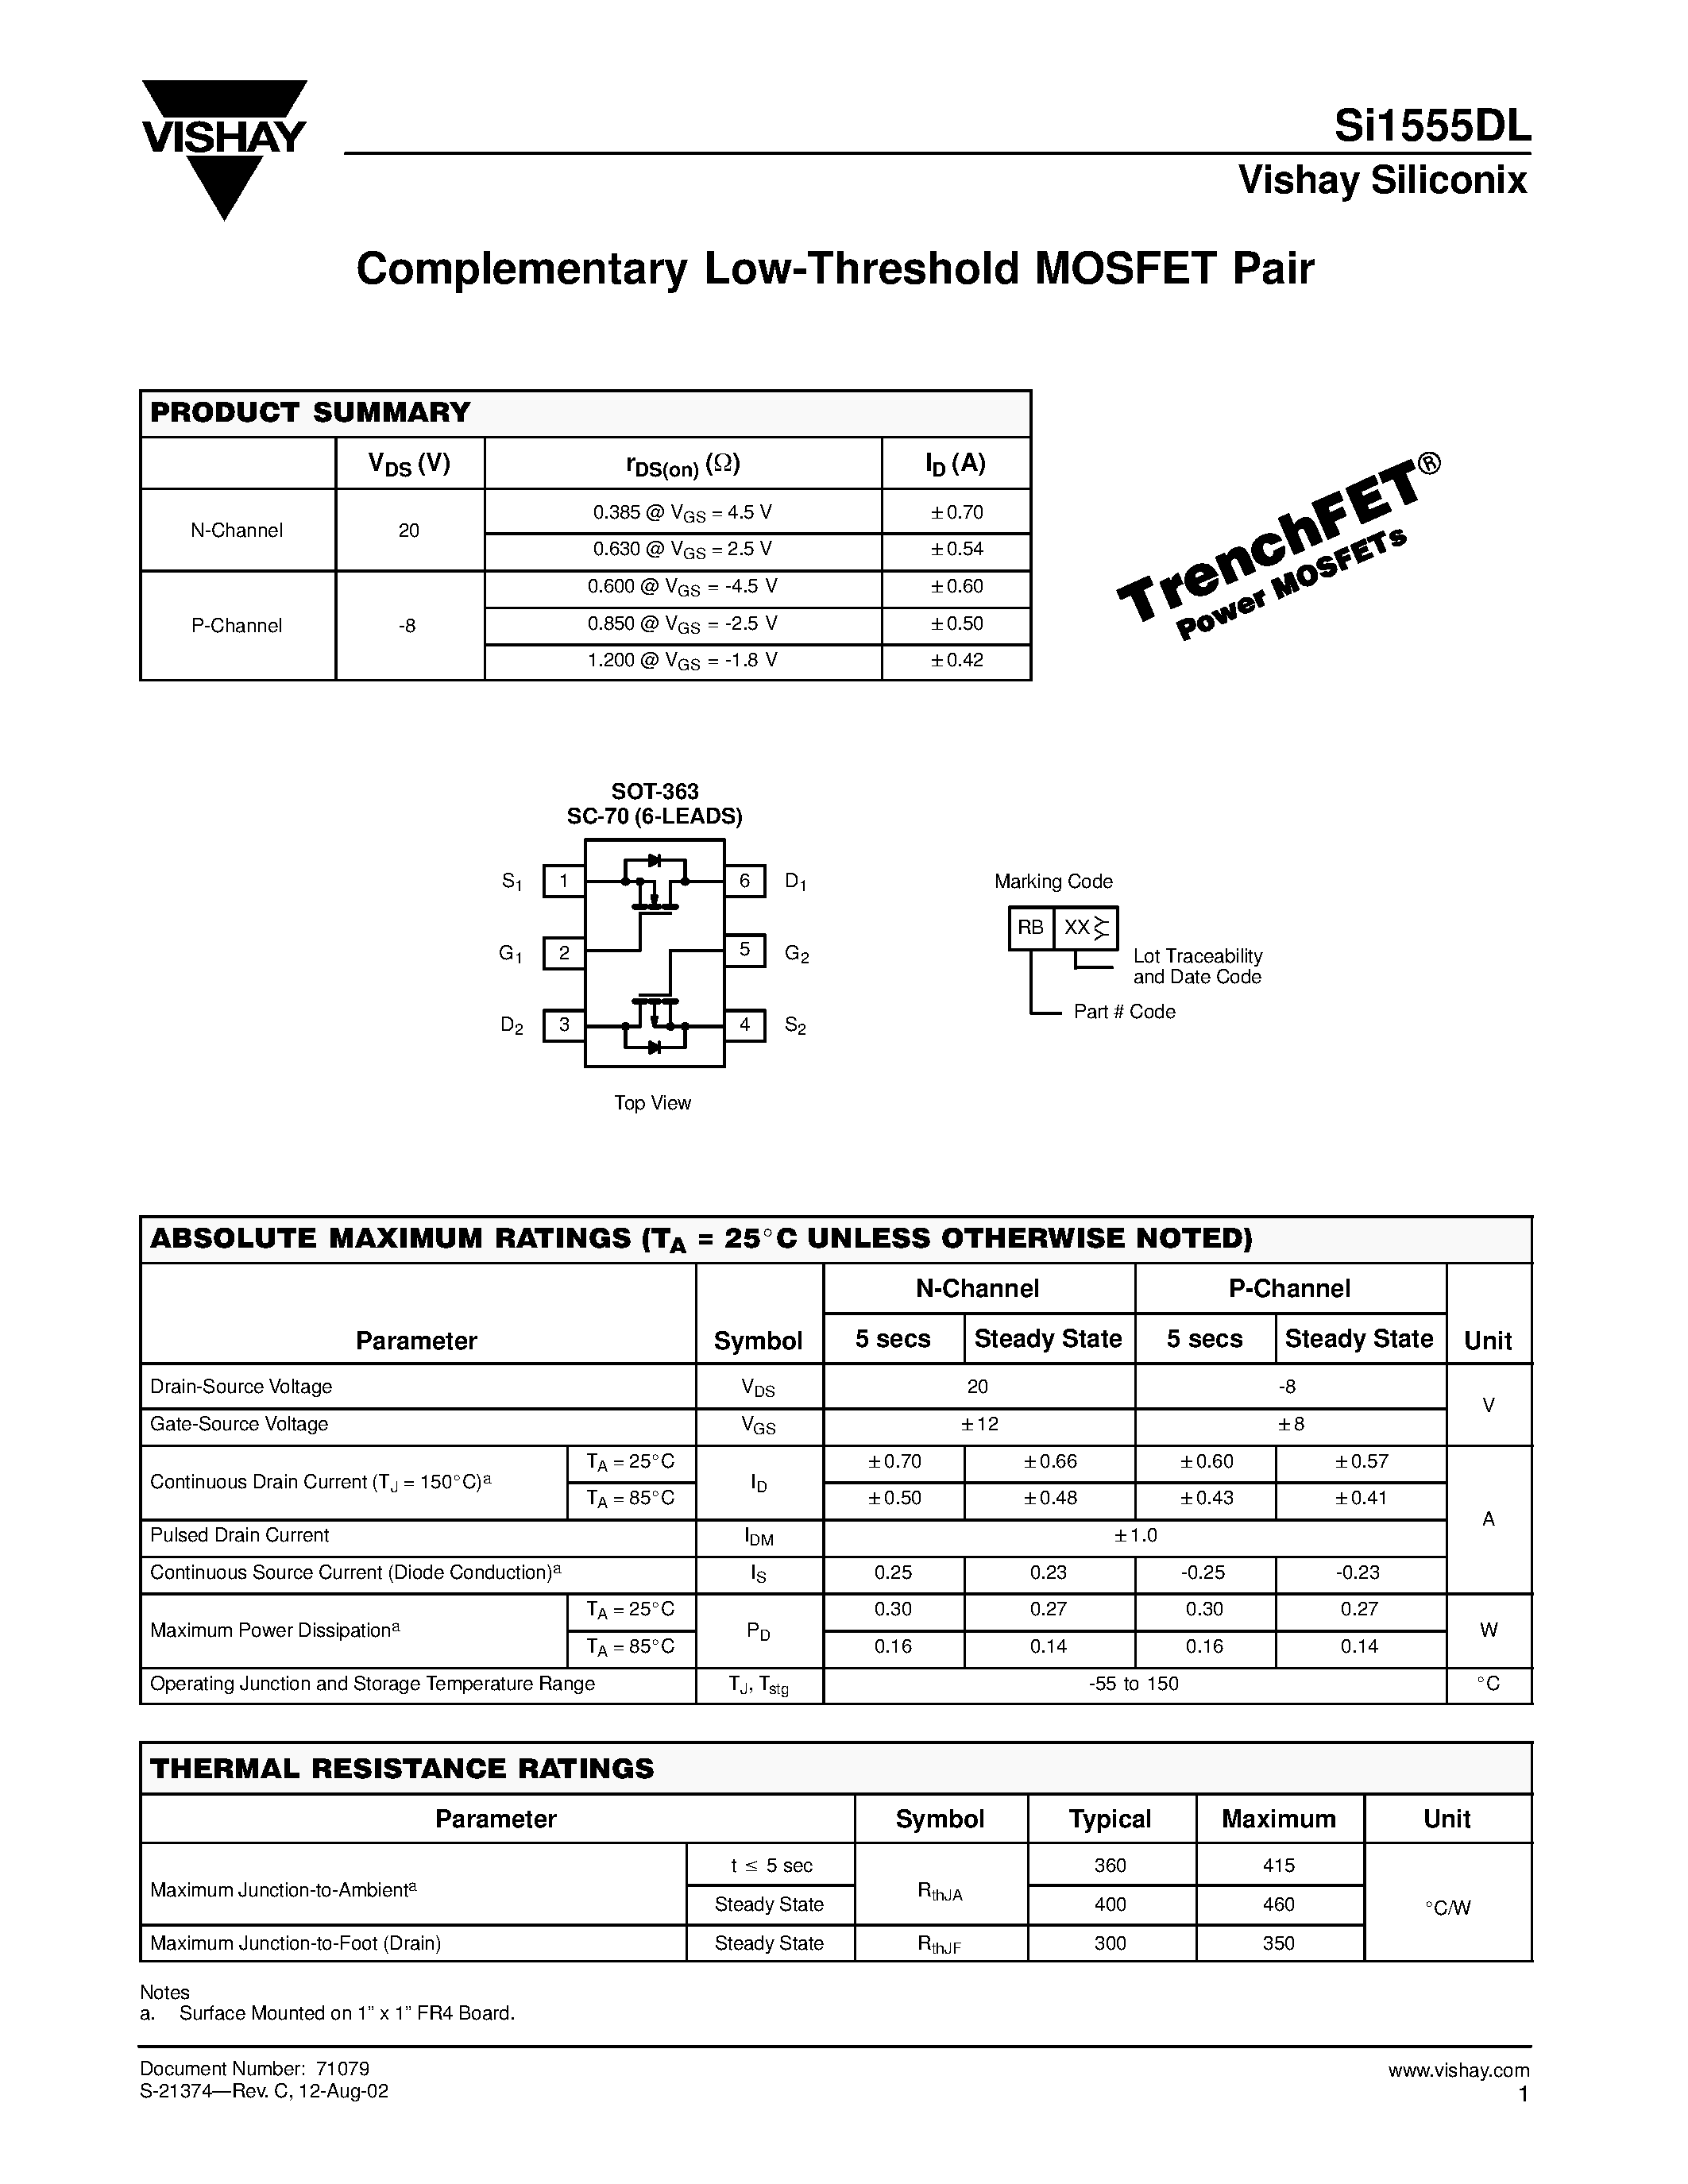 Datasheet SI1555DL - Complementary Low-Threshold MOSFET Pair page 1